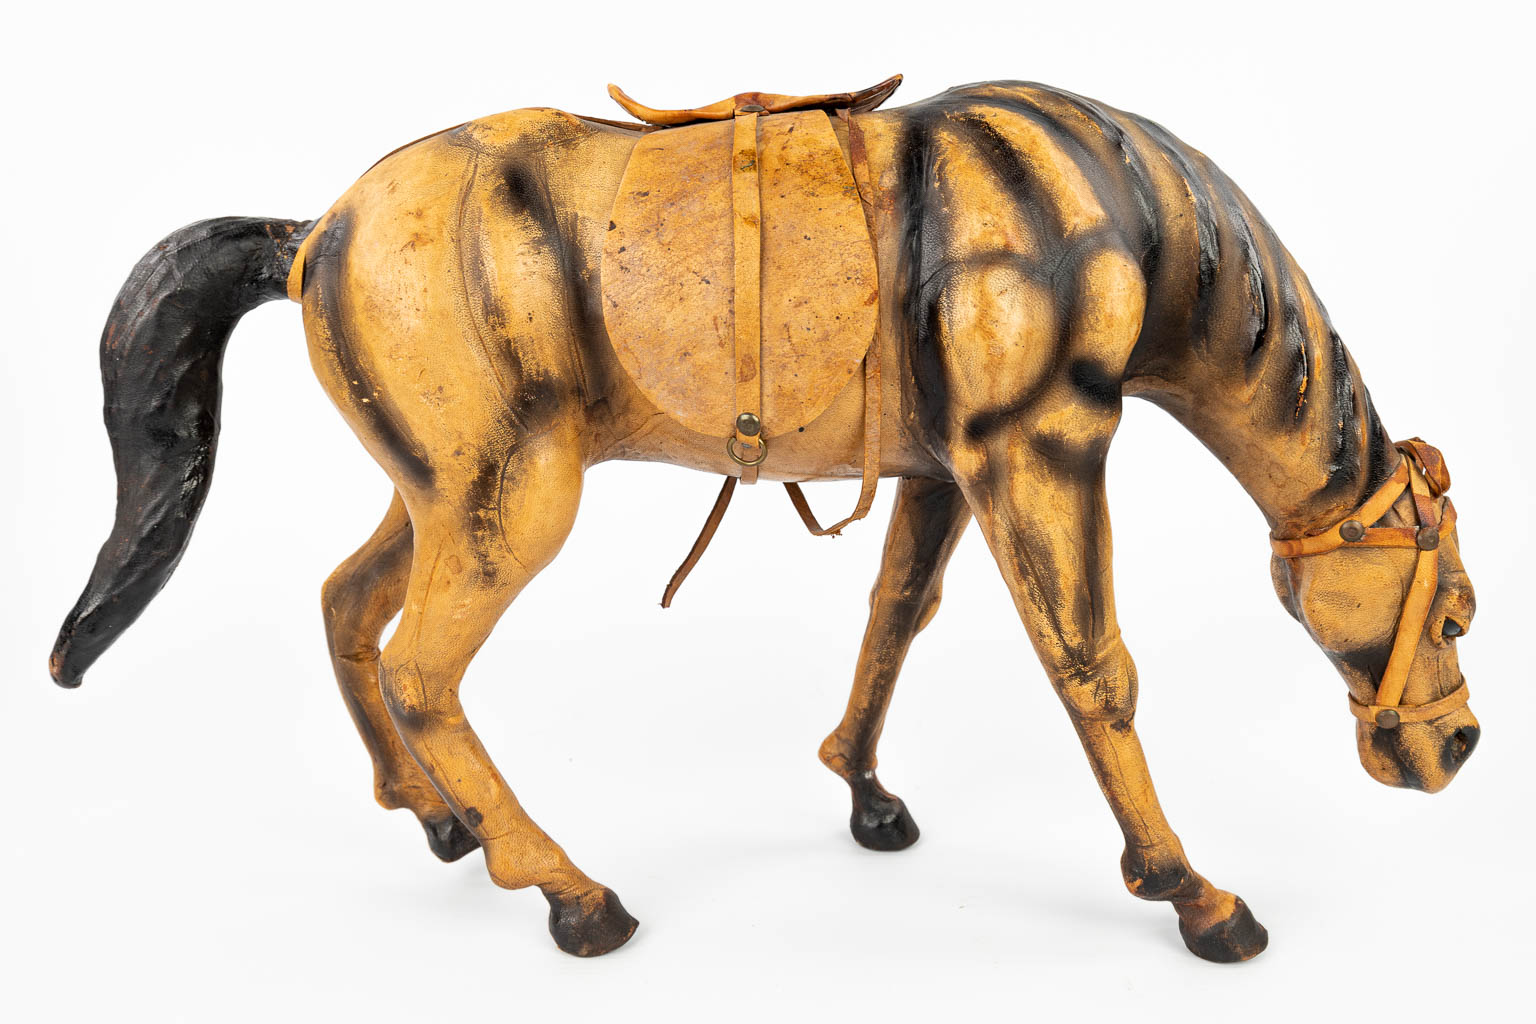 A collection of 15 horses made of Papier Maché and finished with leather. (H:30cm)